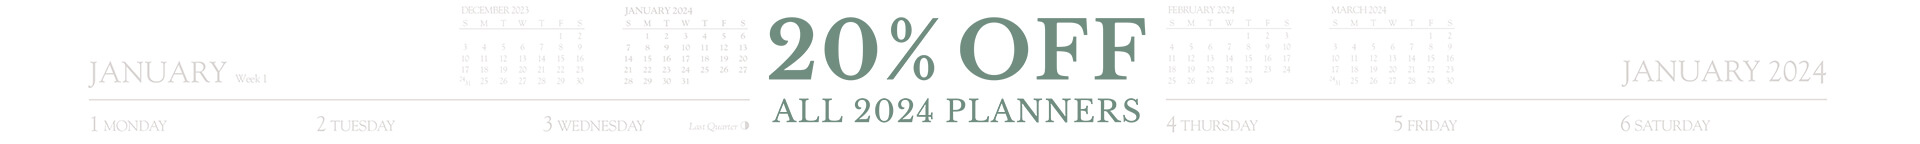 20% off 2024 Planners